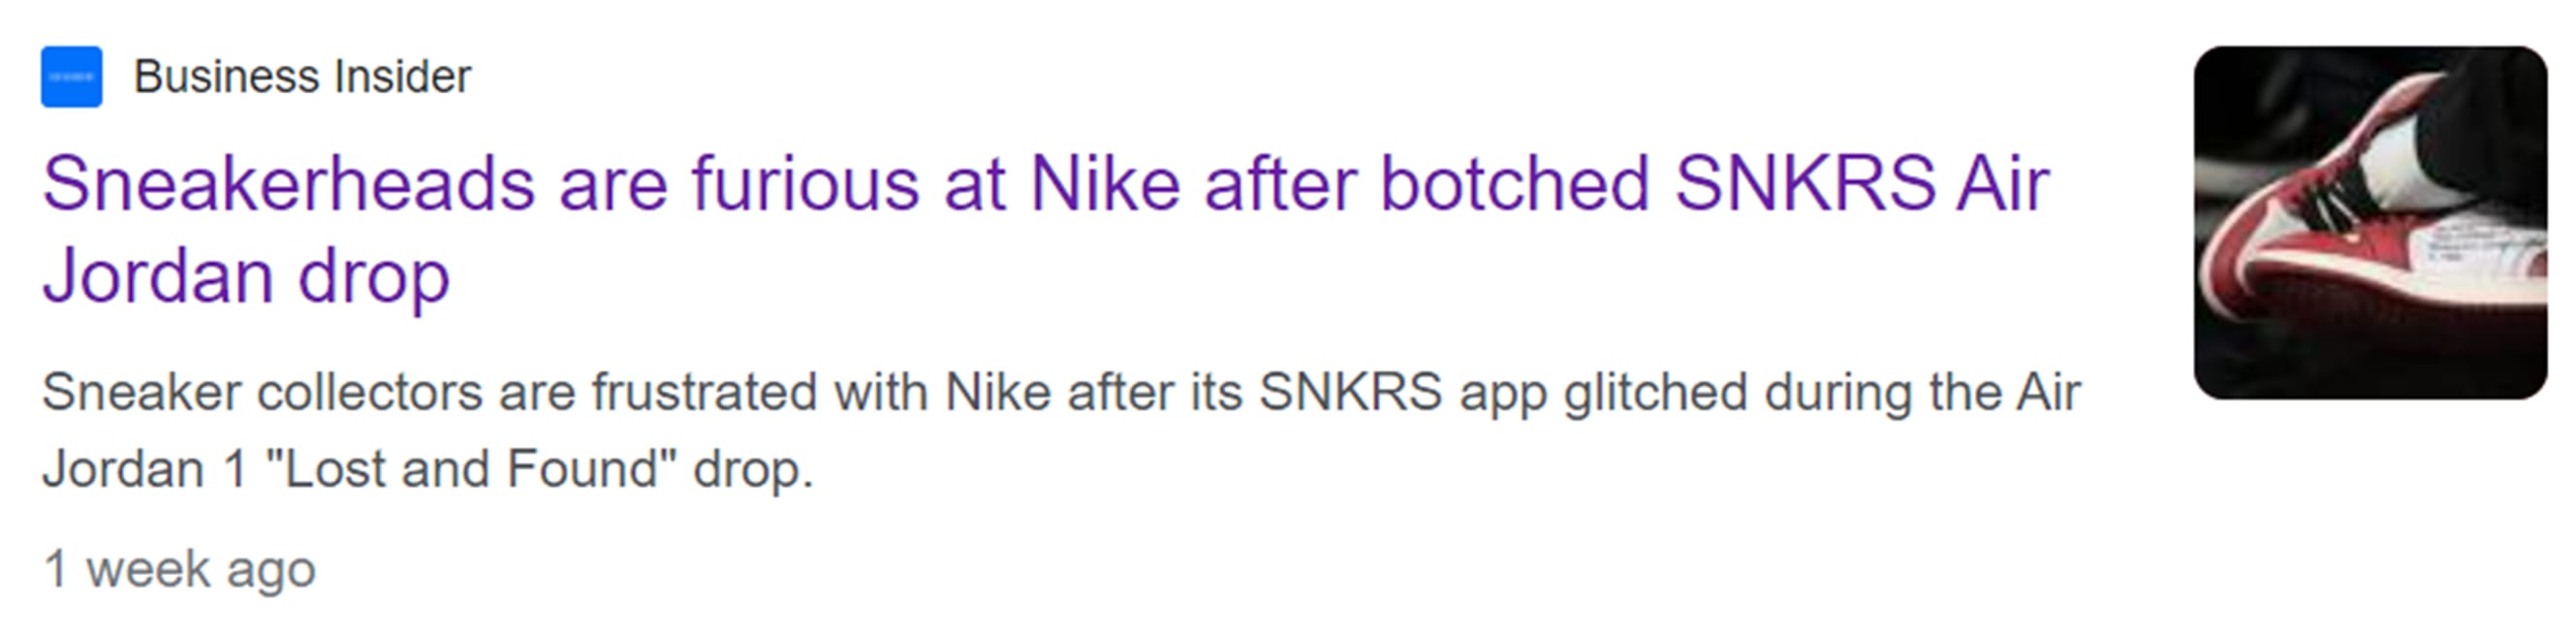 Headline that reads "Sneakerheads are furious at Nike after botched SNKRS Air Jordan Drop"